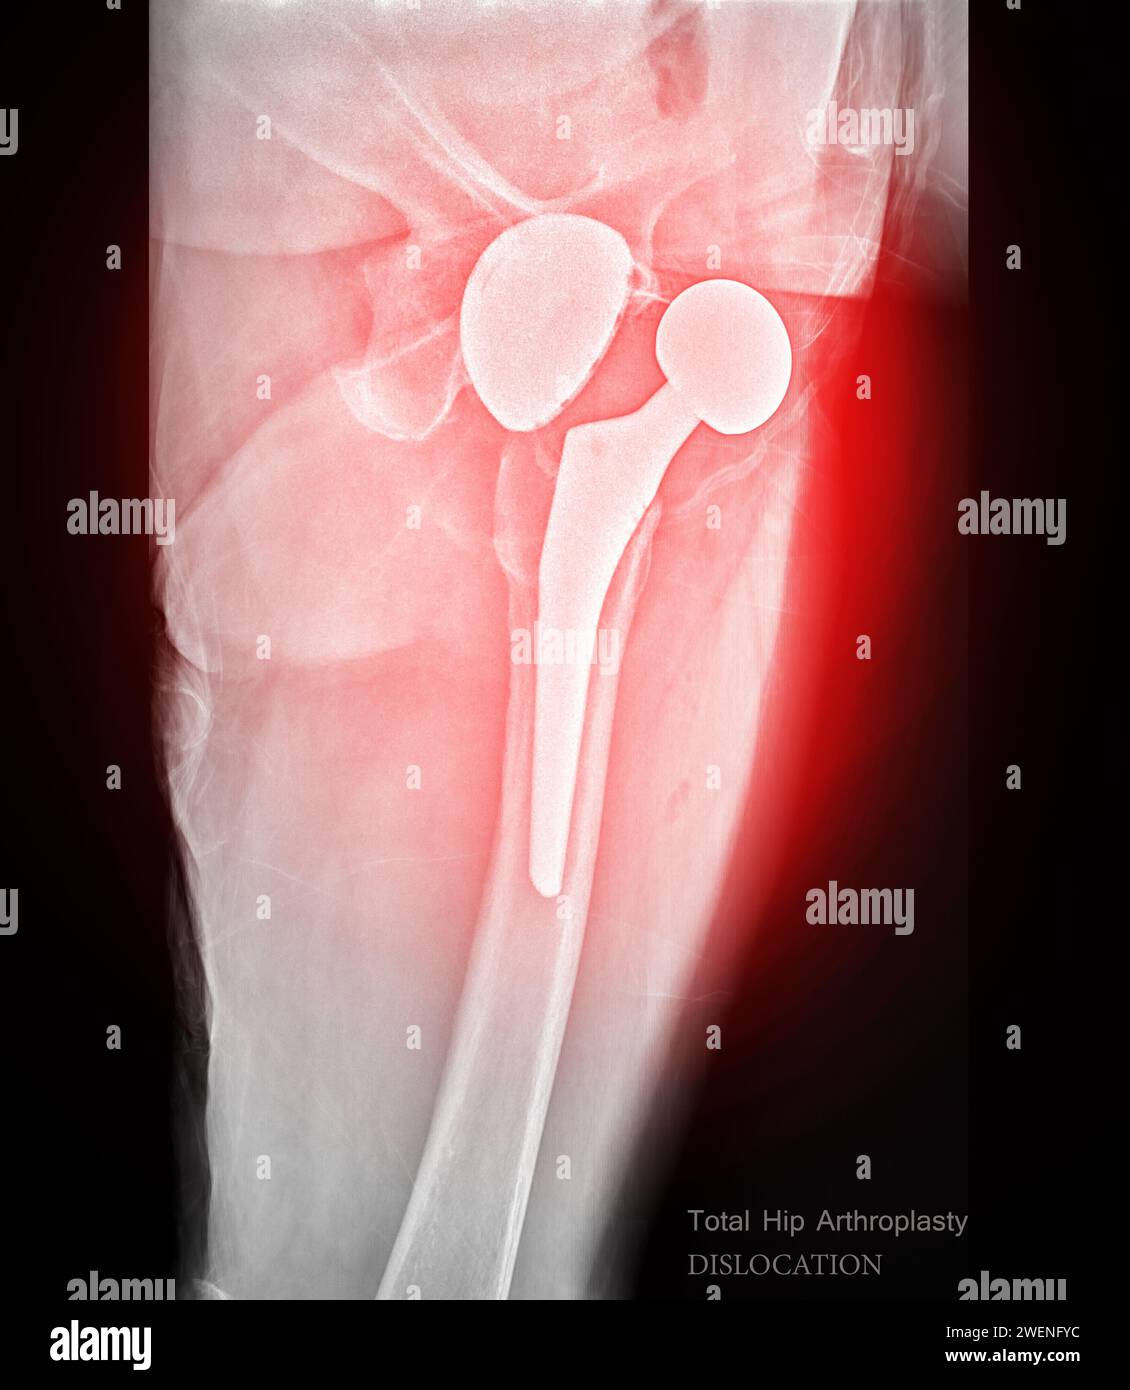 An X-ray reveals both hip joints with prosthetic replacements, showcasing Dislocation of prosthetic replacements. Stock Photo